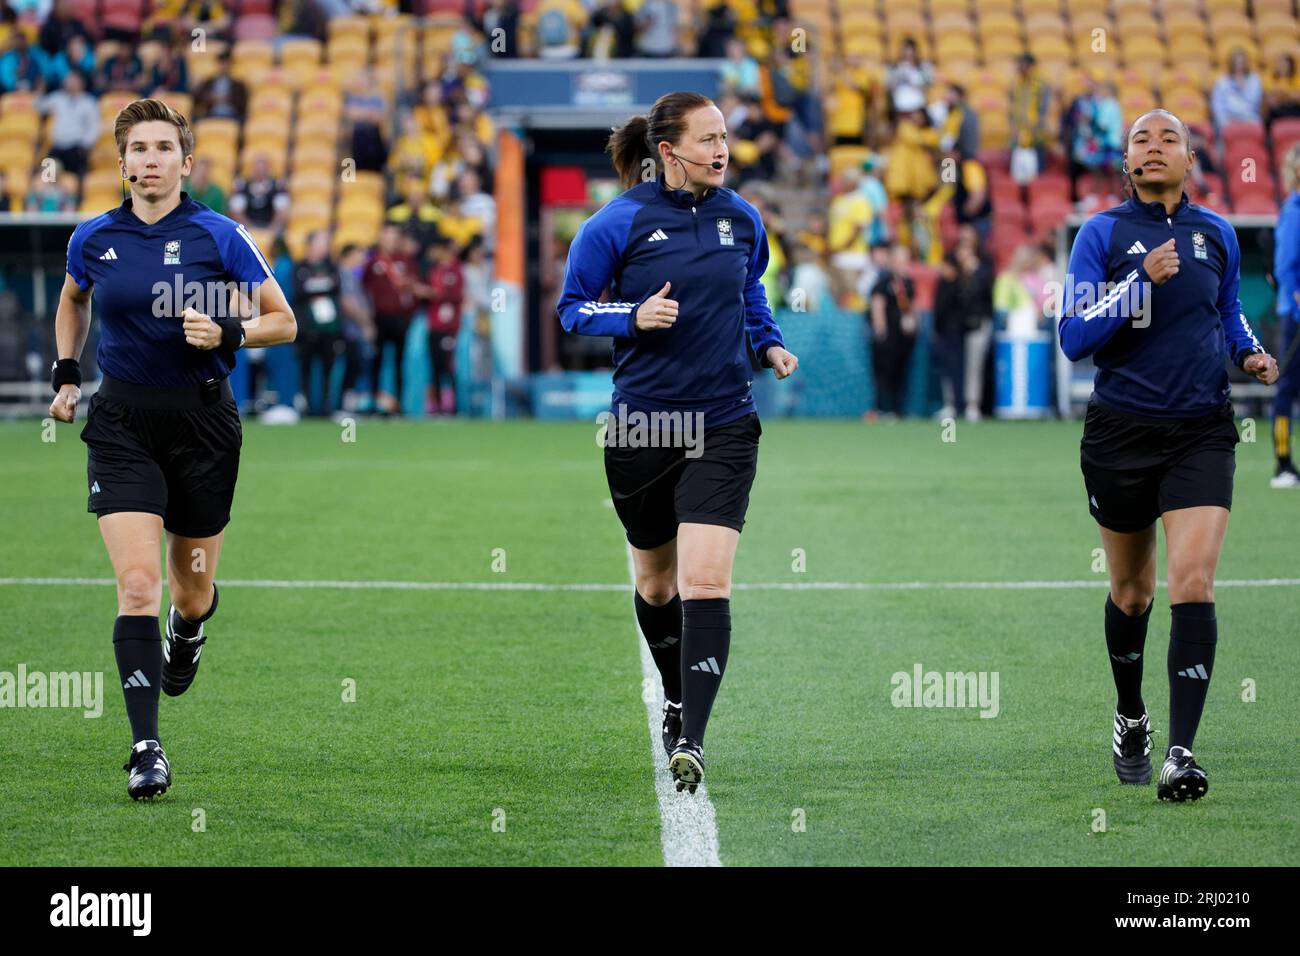 Brisbane, Australia. 19th Aug, 2023. Match referees, Michelle O'Neill, Cheryl Foster and Franca Overtoom warm up before the FIFA Women's World Cup Australia and New Zealand 2023 Third Place match between Sweden and Australia at Brisbane Stadium on August 19, 2023 in Brisbane, Australia Credit: IOIO IMAGES/Alamy Live News Stock Photo